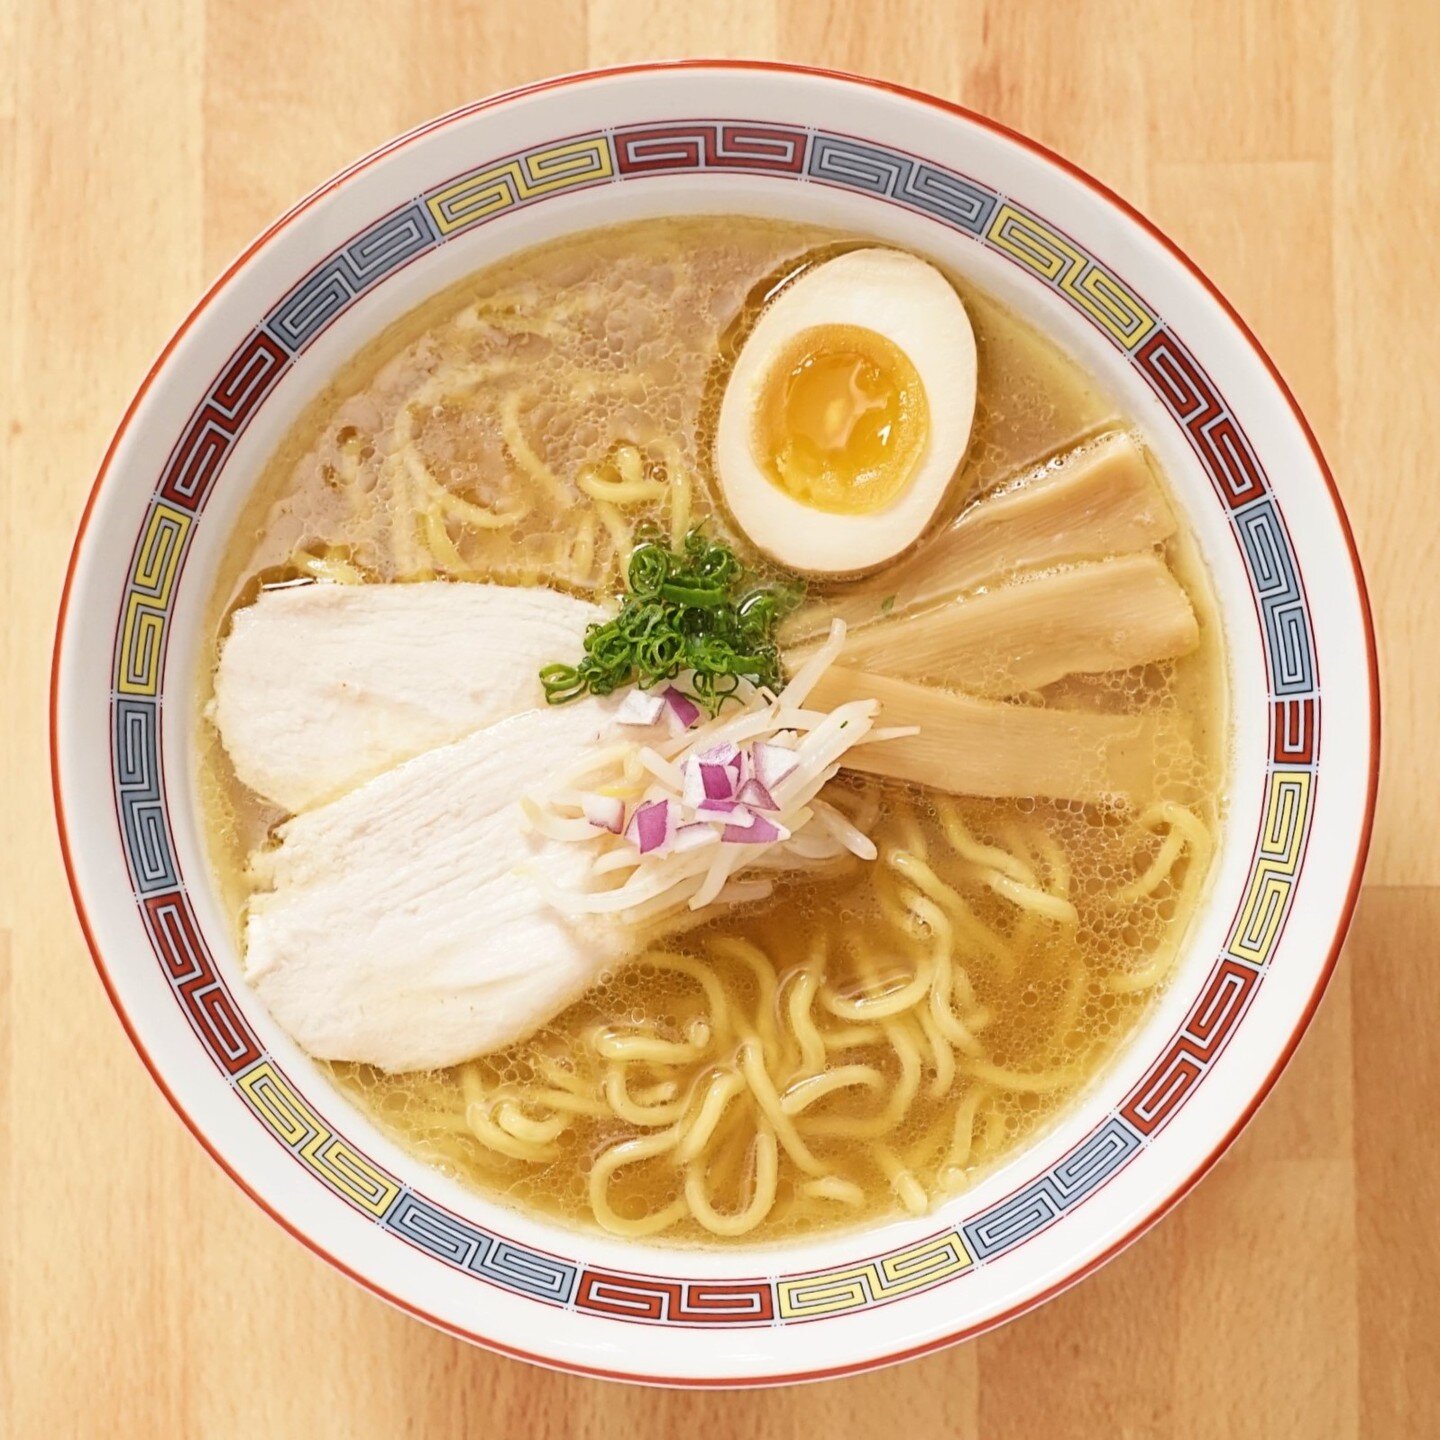 Come and enjoy our warm original chicken ramen🍜 and pair it with our delicious appetizers dishes🤭

🍜JAPANESE RAMEN GACHI🍜
📍2268 W Holcombe Blvd, Houston, TX 77030

#ramengachi #houstonremen